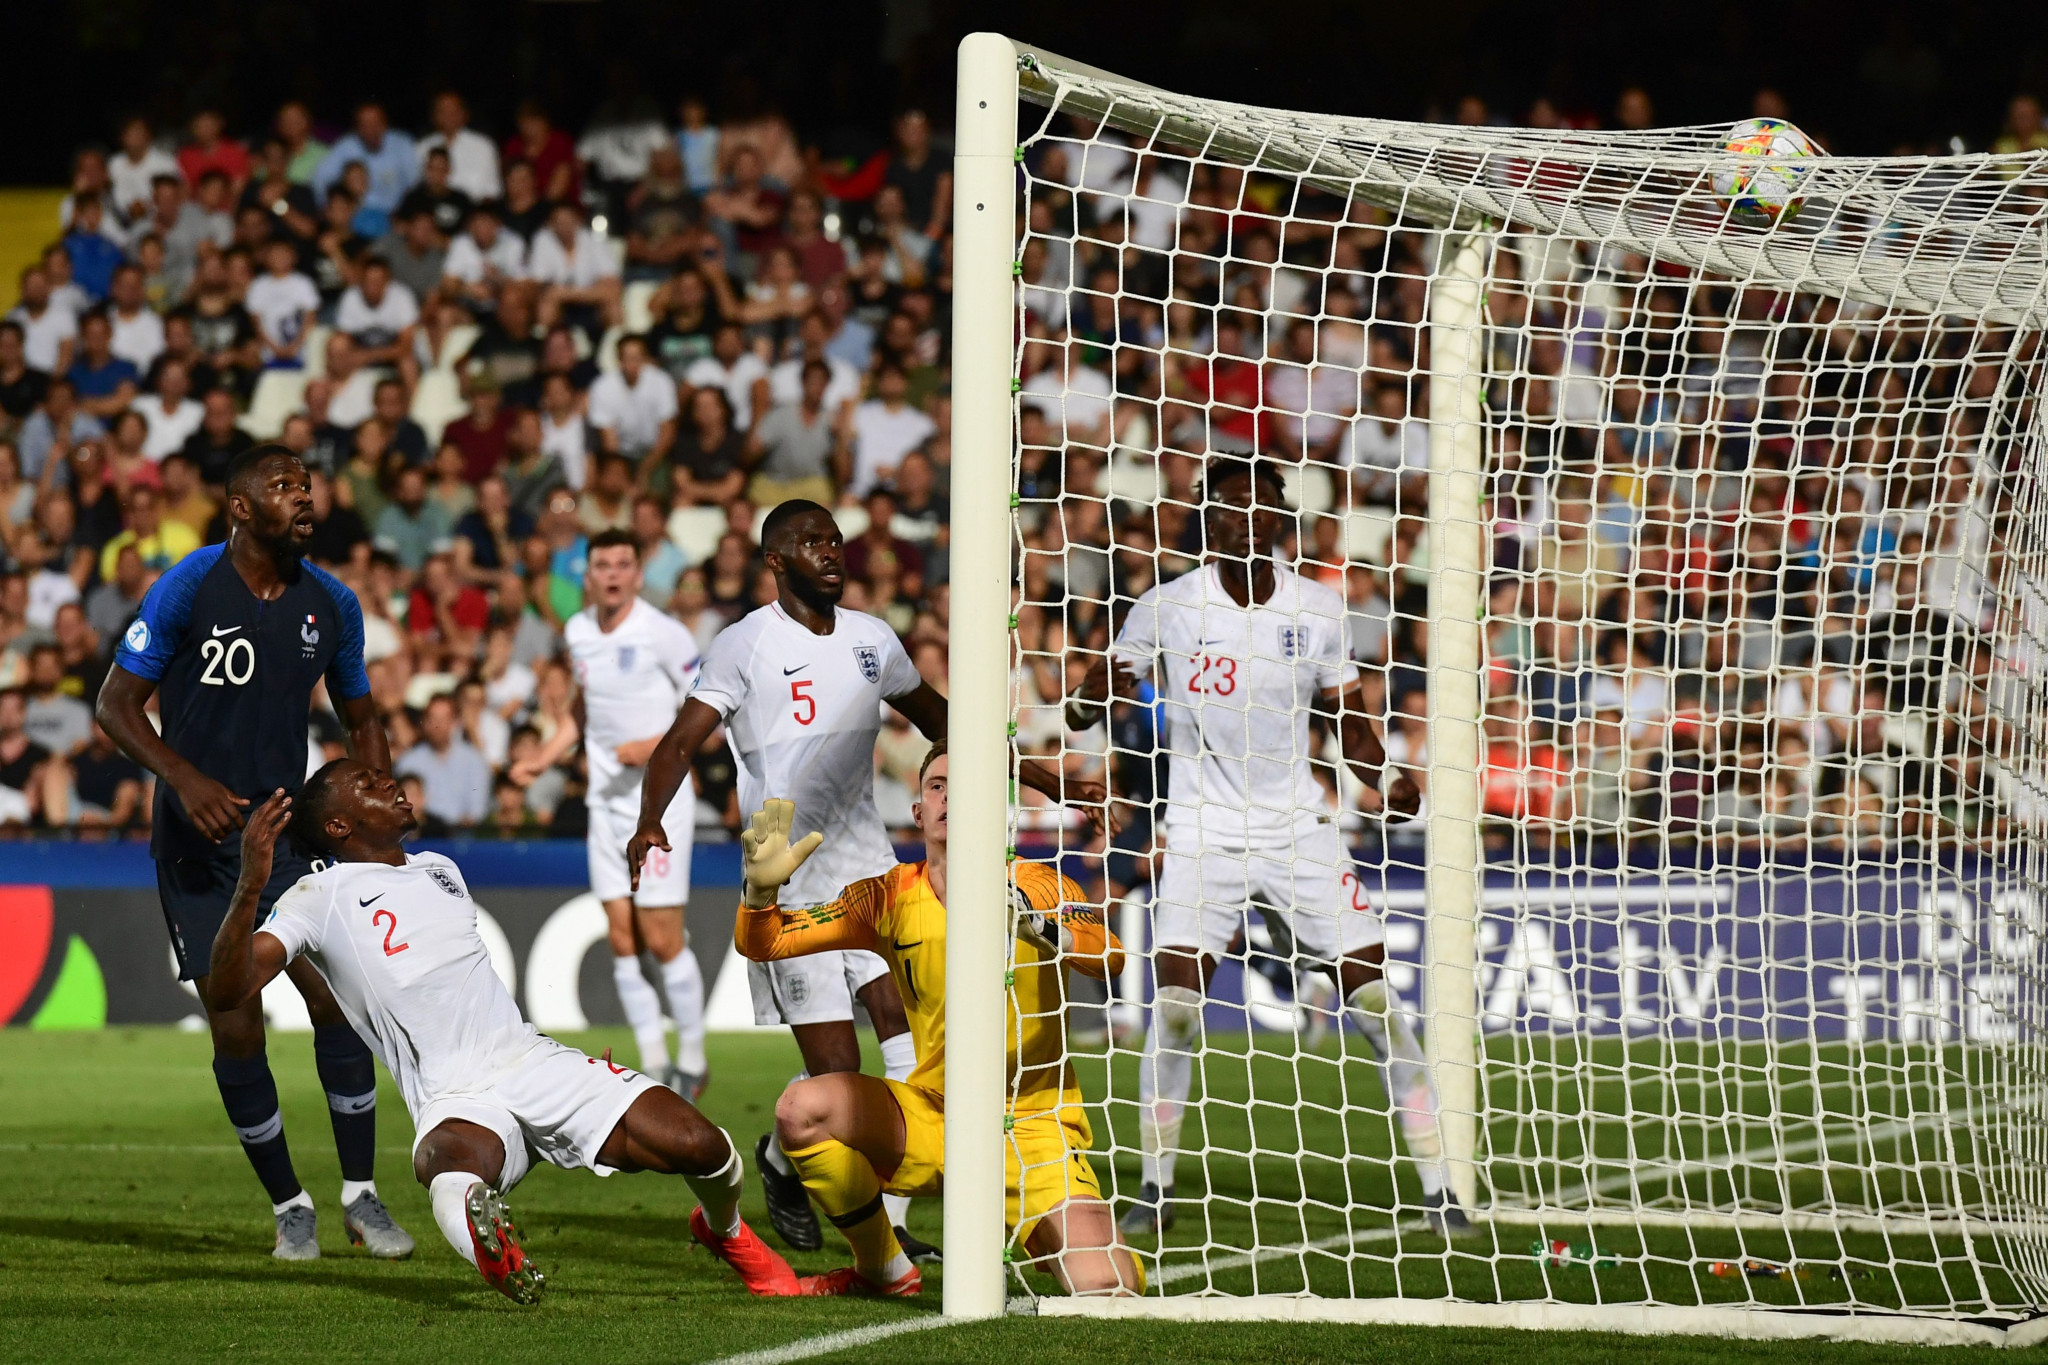 England's Aaron Wan-Bissaka scores an own goal deep into second-half stoppage time ©Getty Images